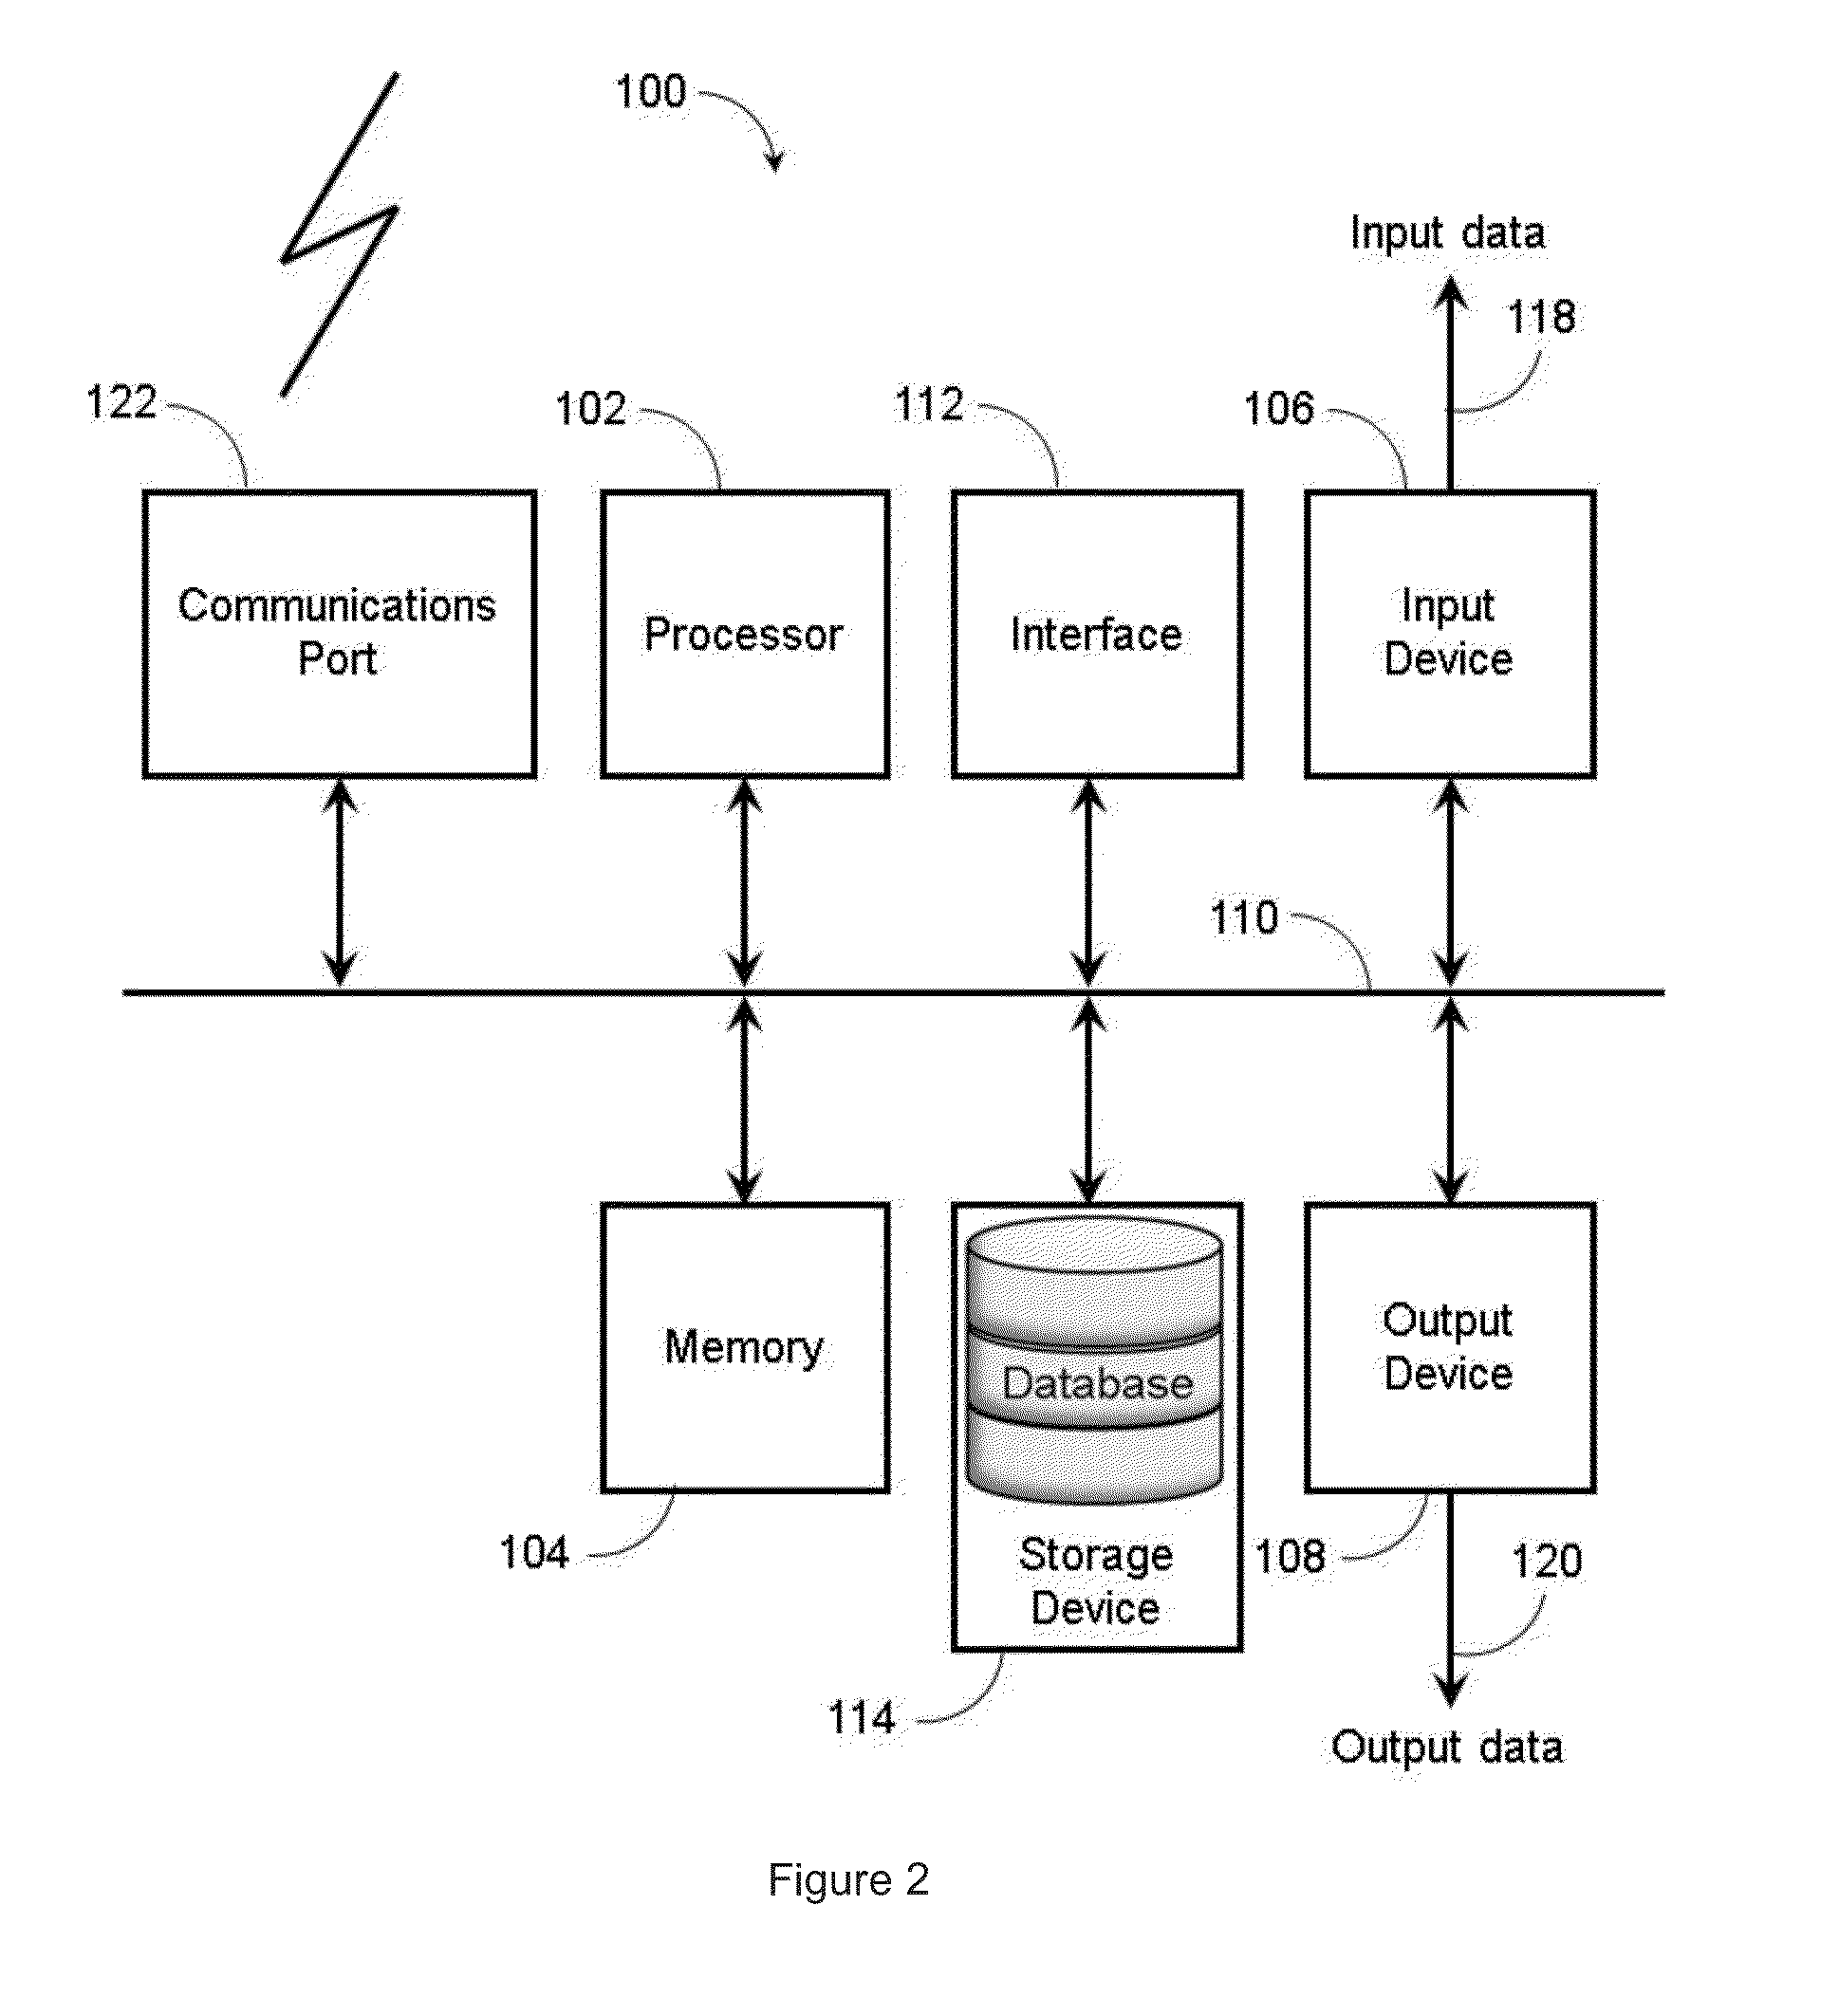 Method and system for analyzing the level of user engagement within an electronic document